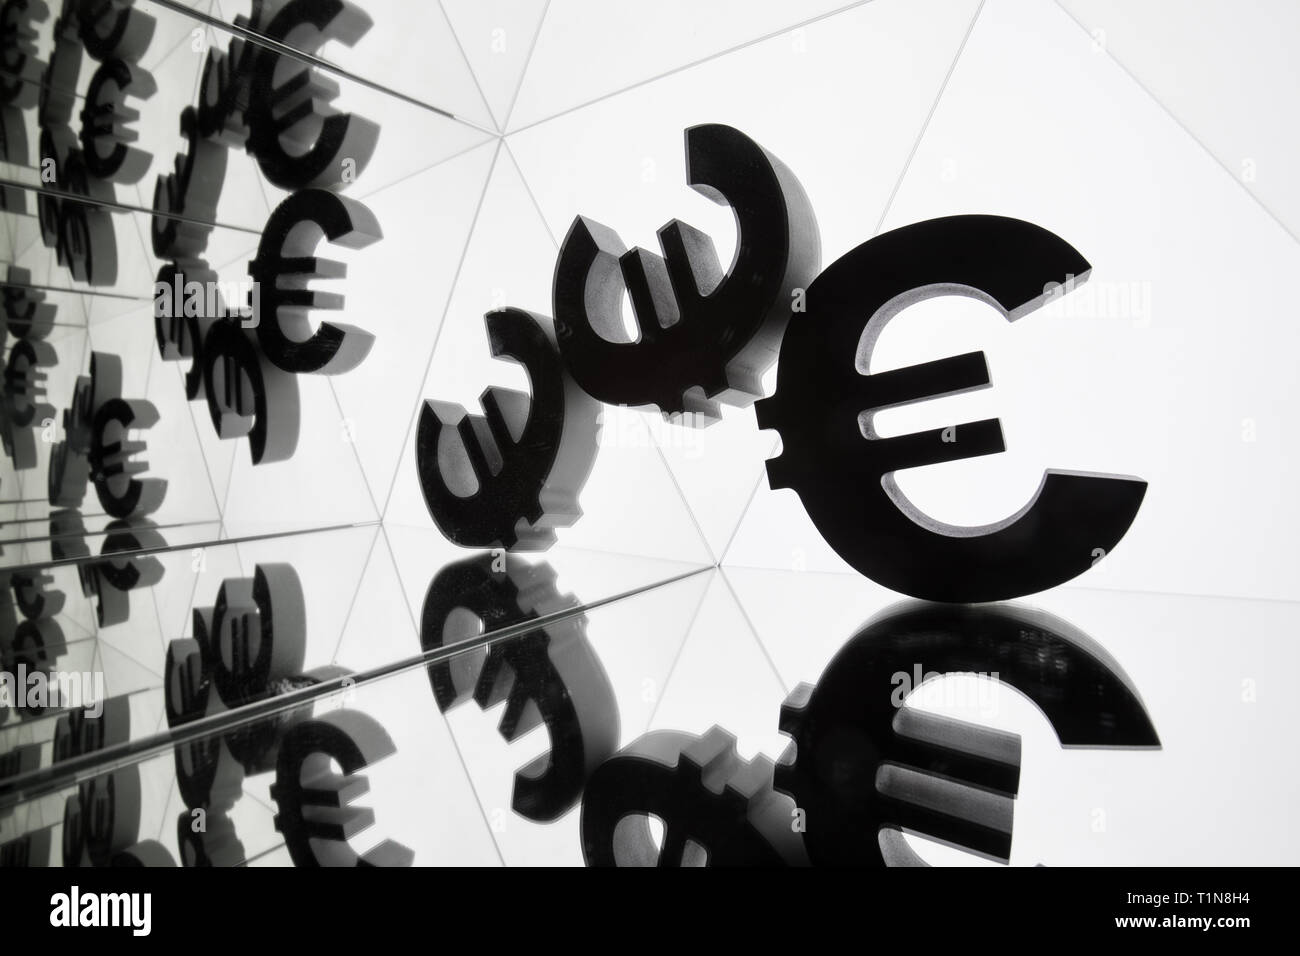 Euro Currency Symbol With Many Mirroring Images of Itself on White Background Stock Photo